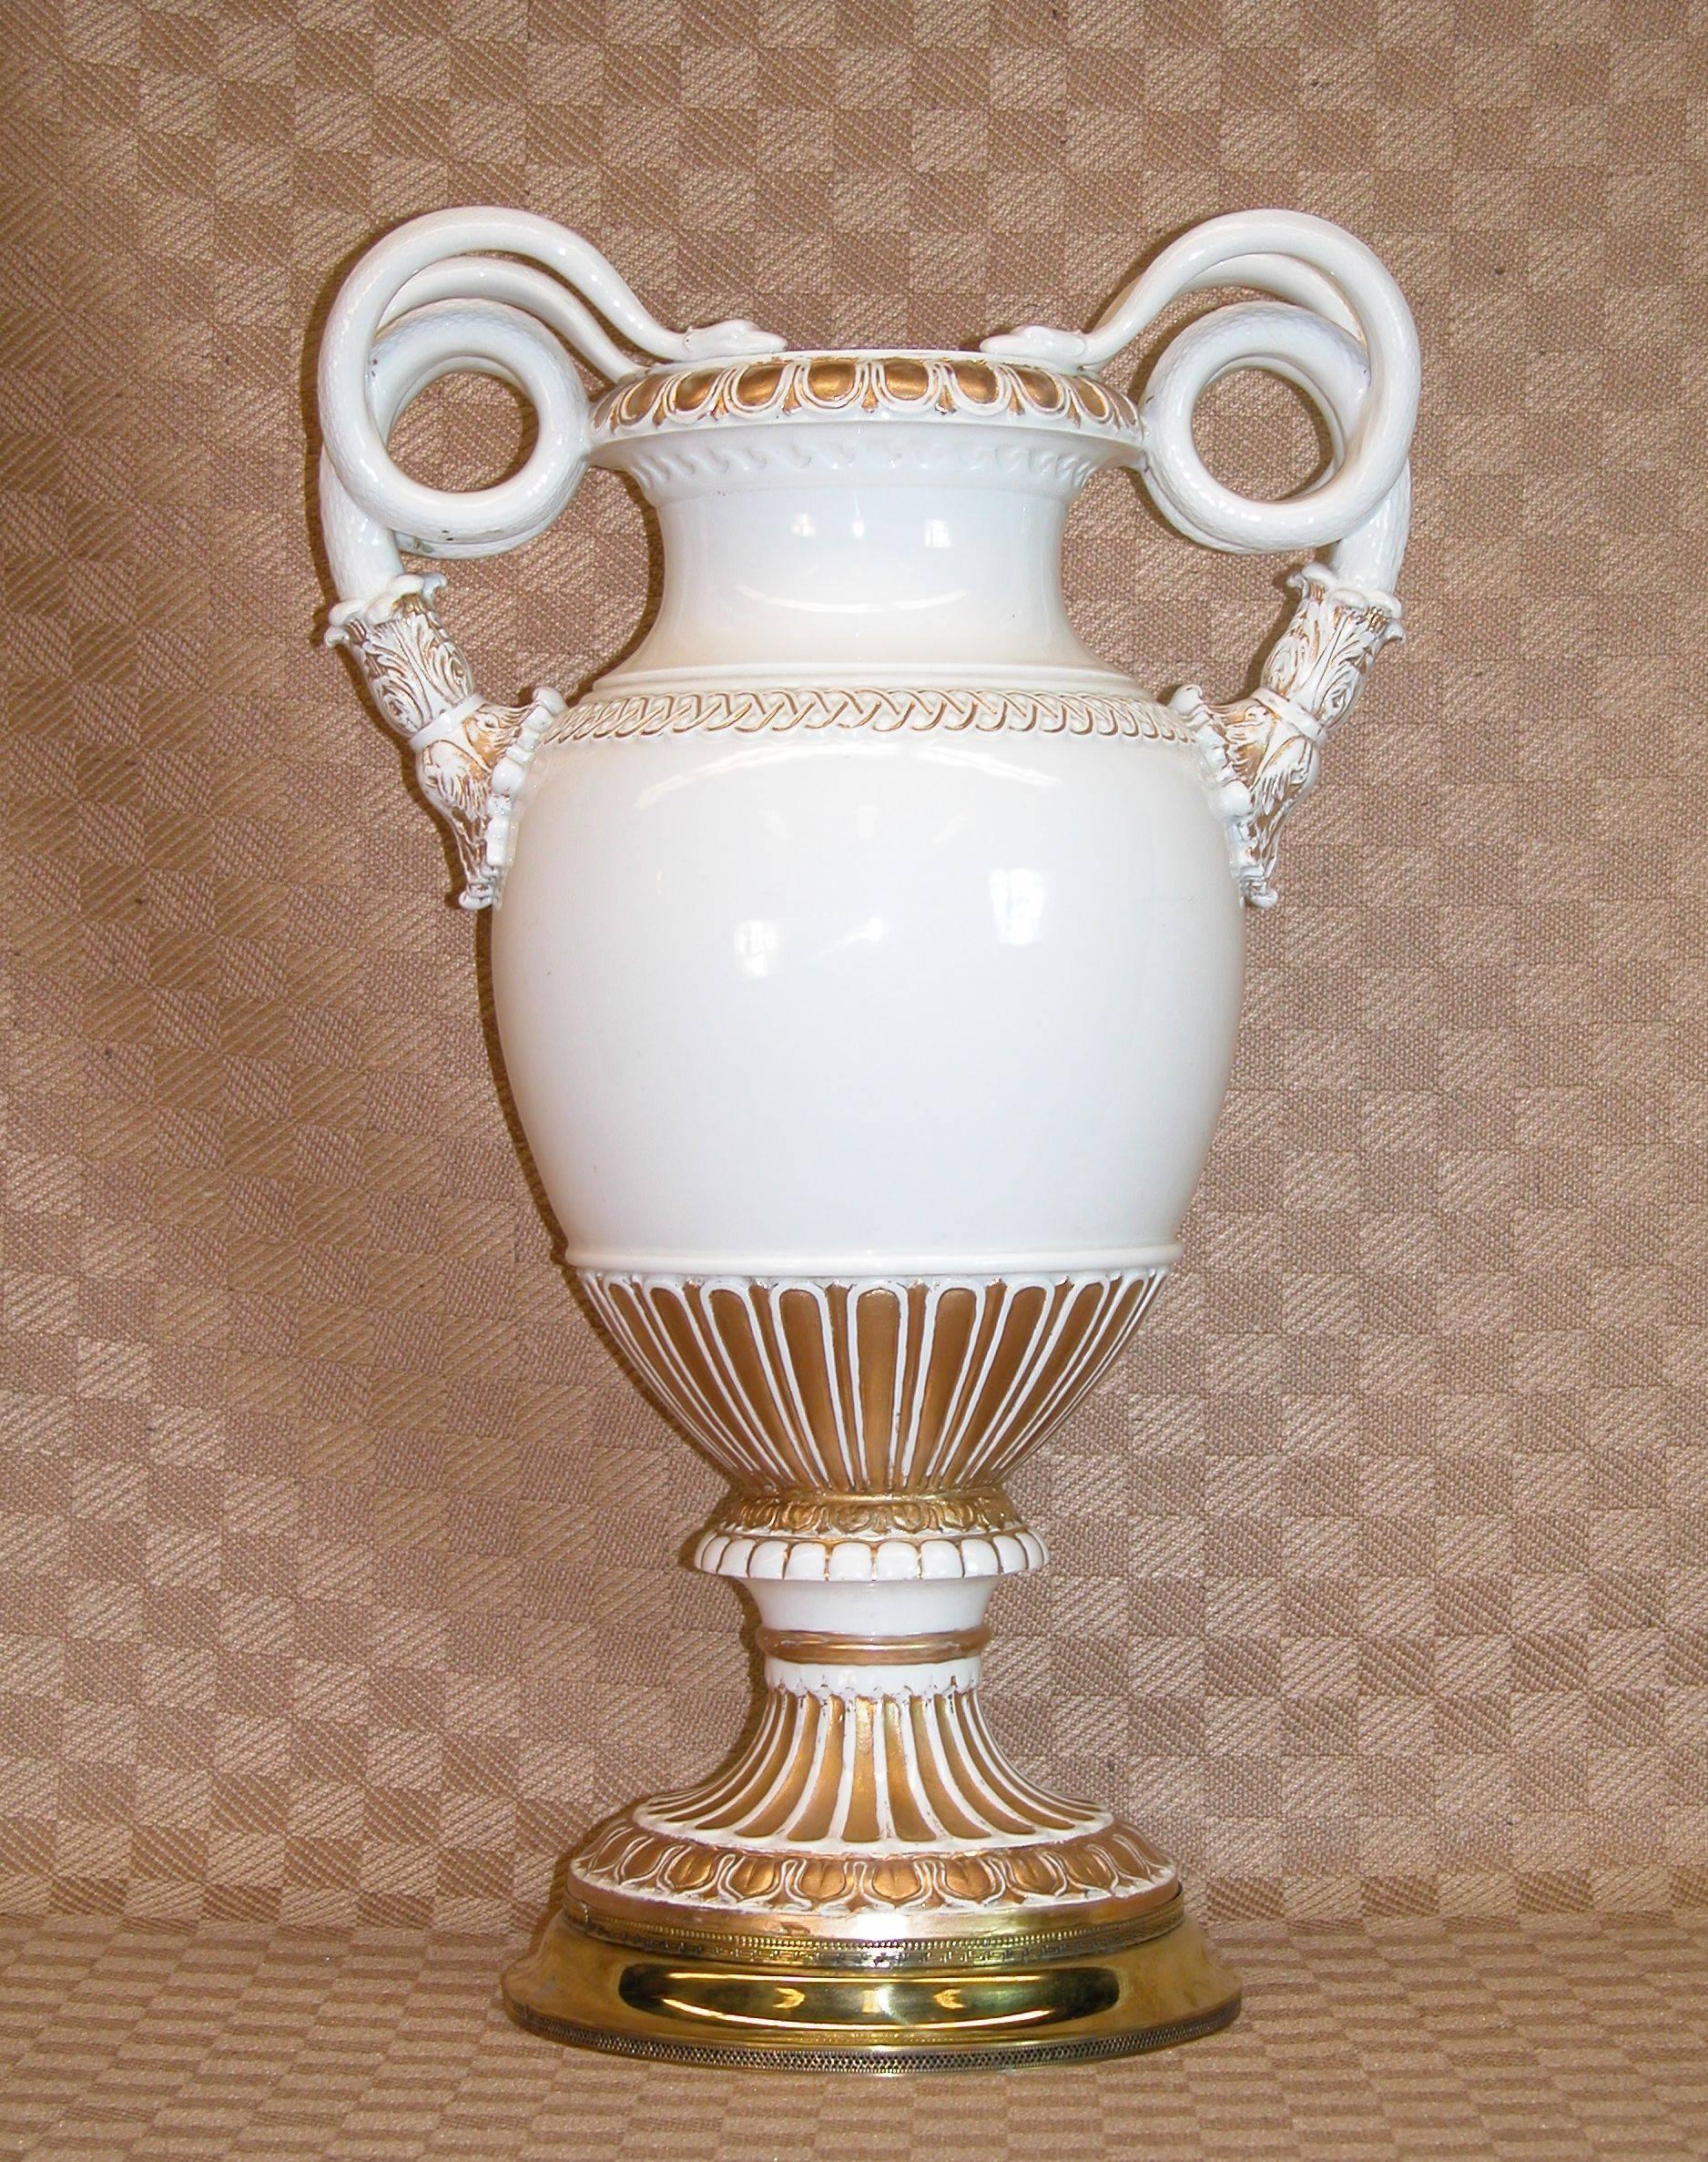 Meissen porcelain vase, Germany, mid-late 19th century, with scrolled snake handles, gilding to rim, handle terminals, lower body, and socle, crossed swords marks, ht. 15 3/8 inches tall. Resting on a brass base and includes a tubular brass liner to